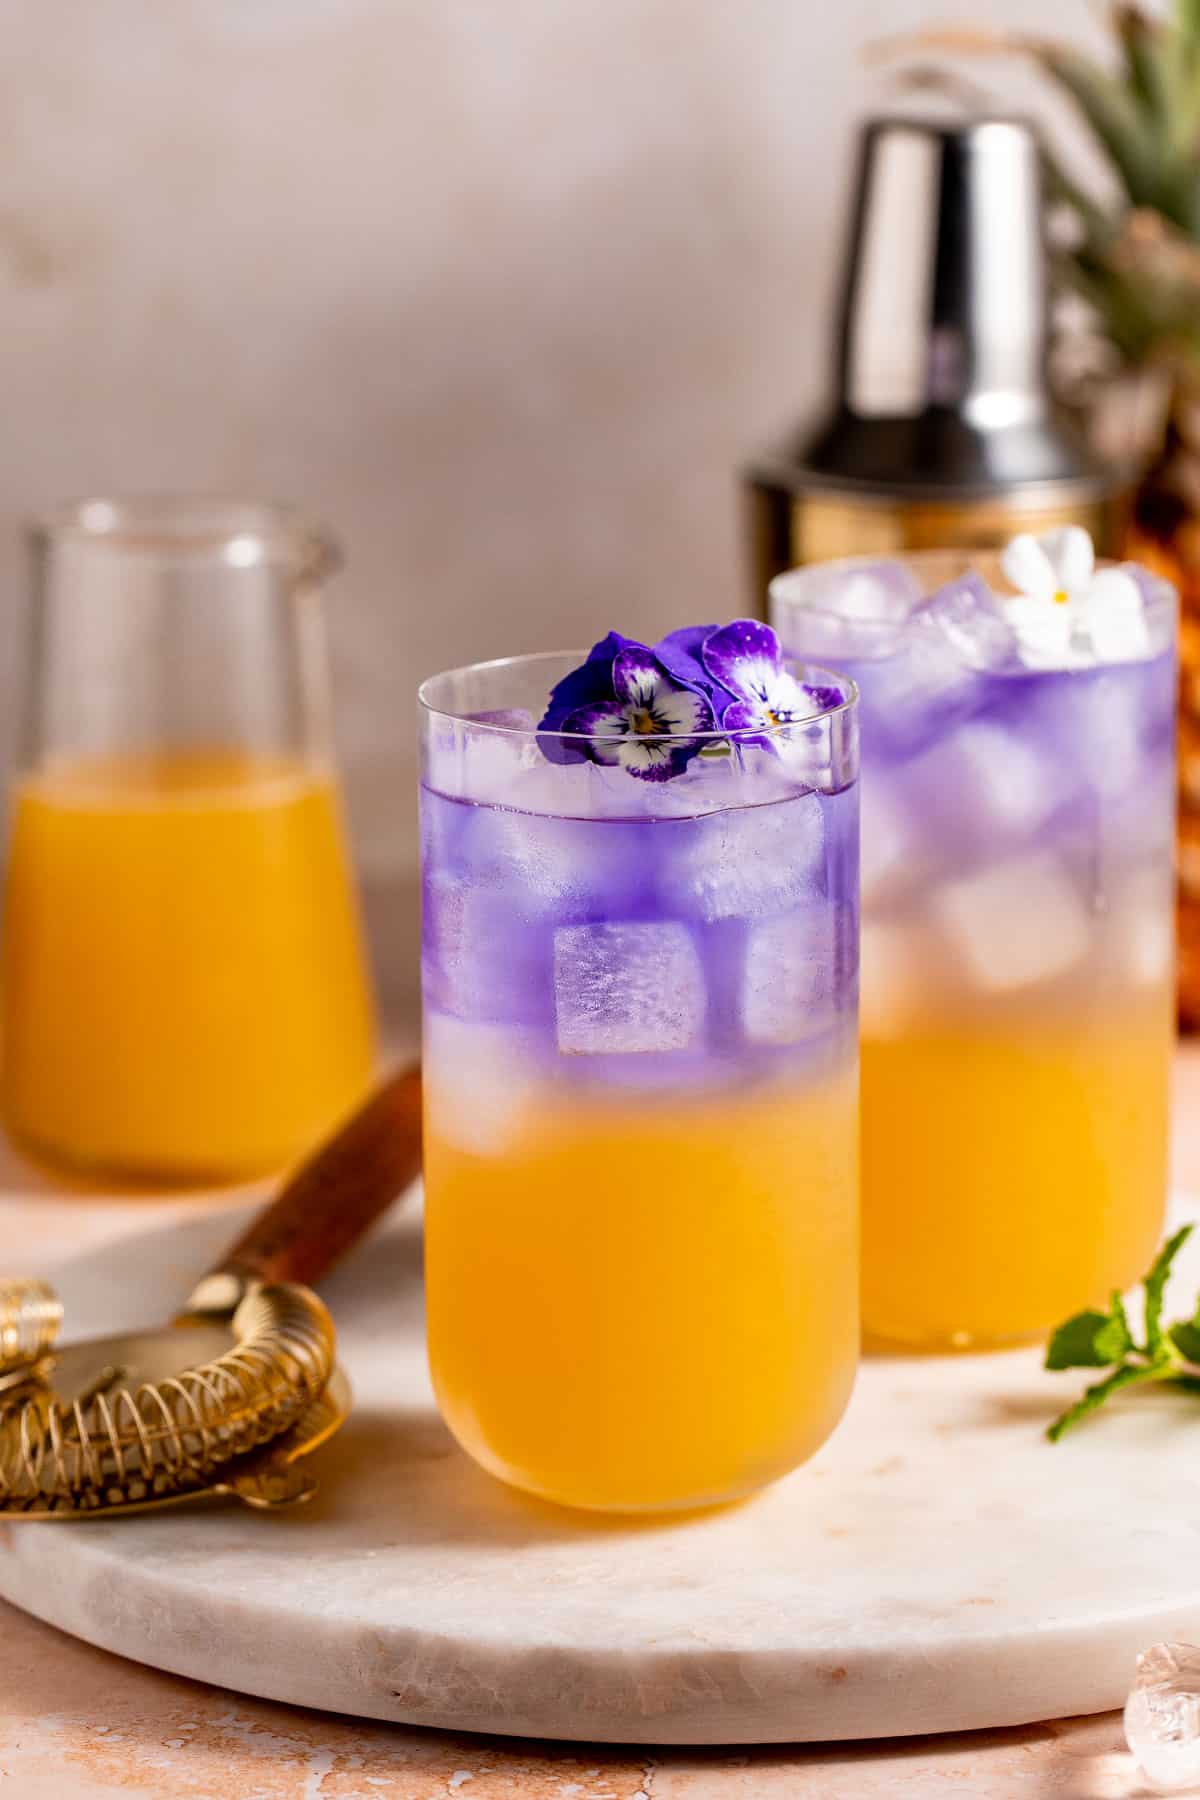 Gin and Juice Drinks served in a cocktail glass filled with ice and garnished with edible flowers.